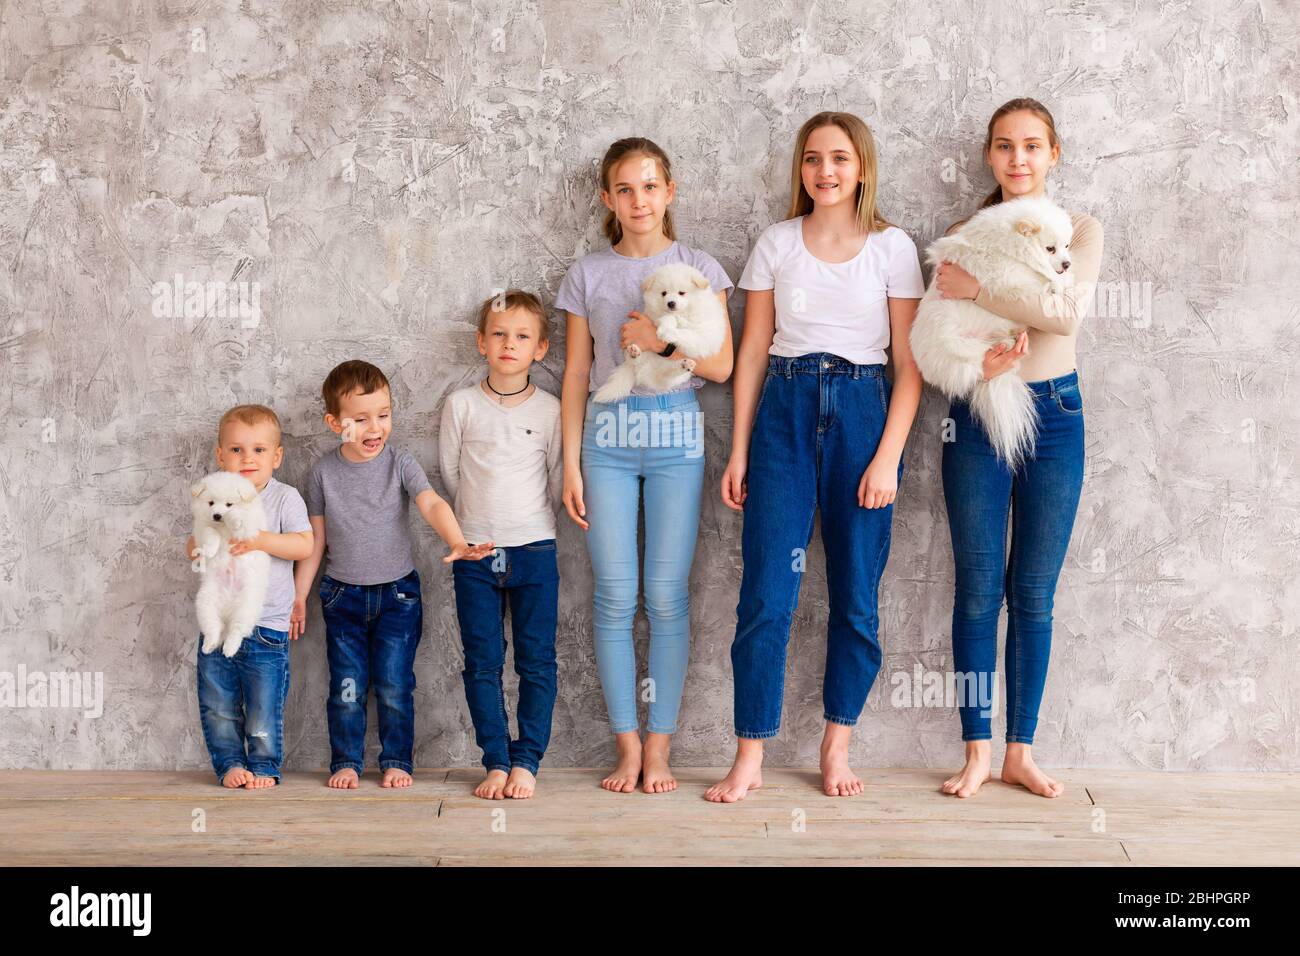 Happy children of different age with puppies standing in line. Teamwork, friendship and togetherness concept Stock Photo